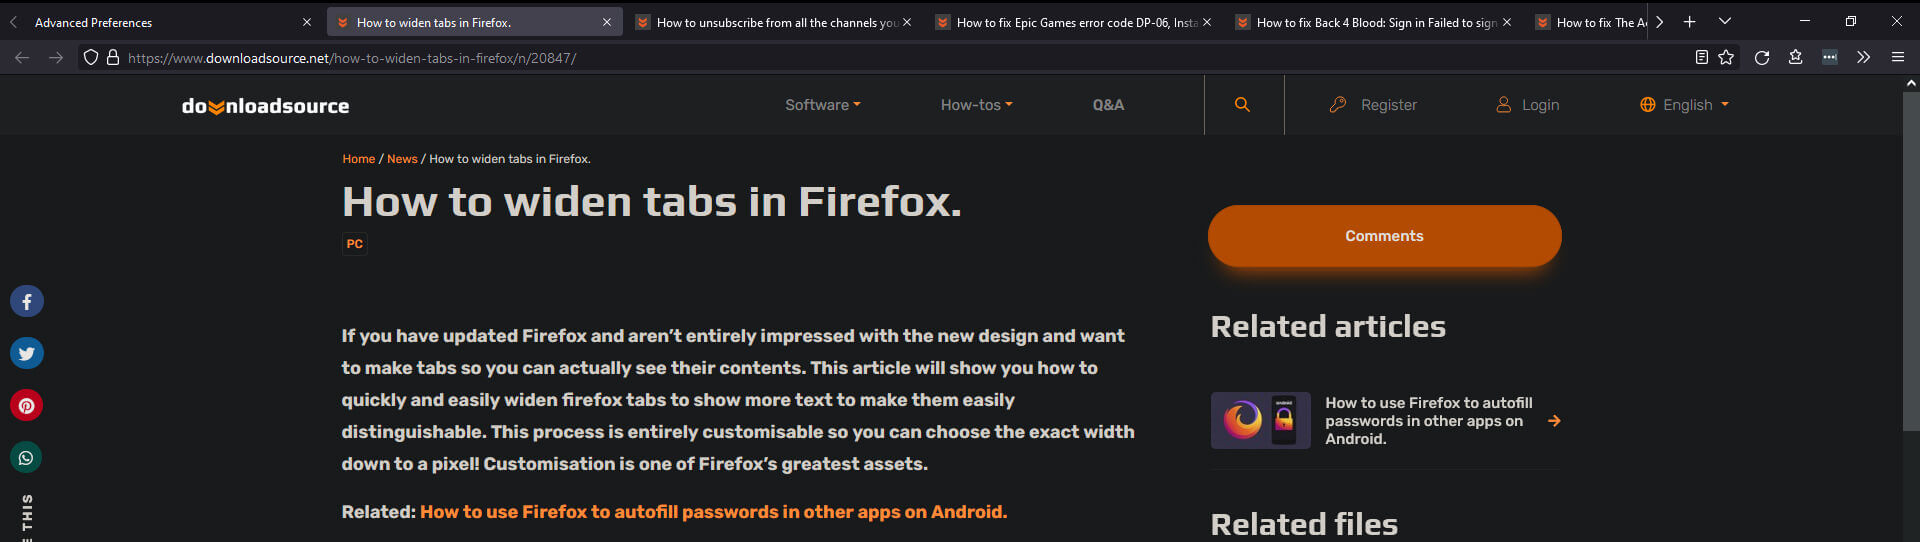 how to widen firefox tabs to show more text